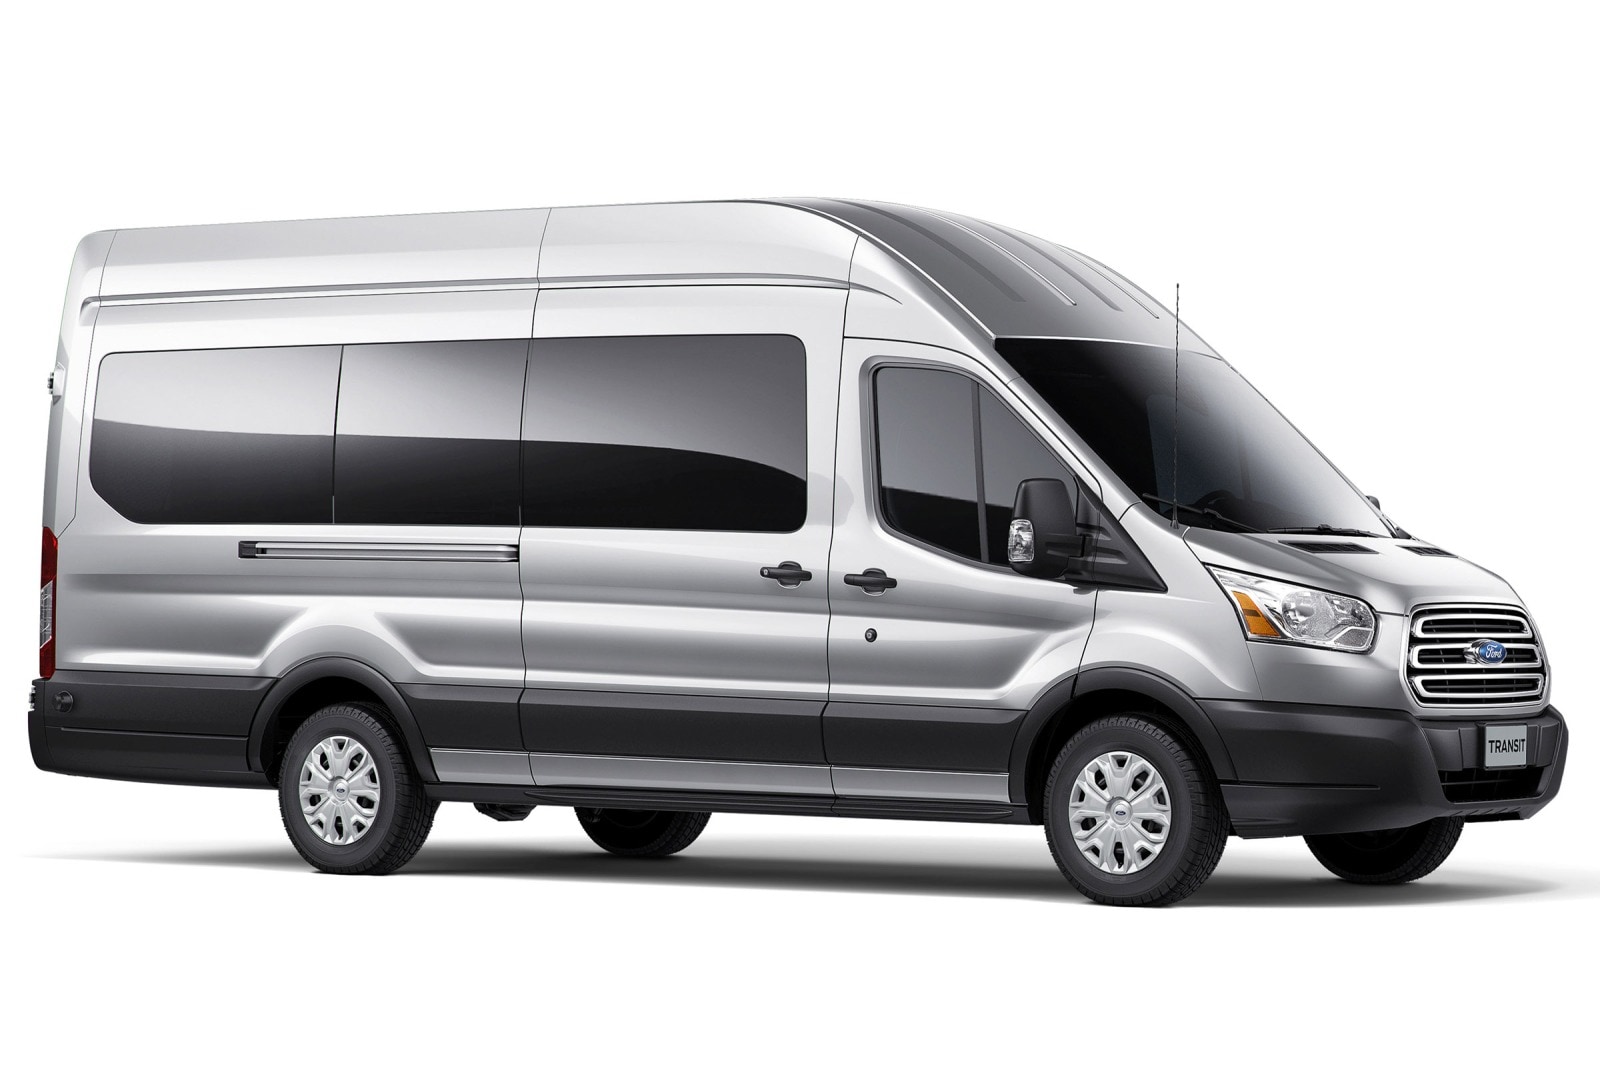 2015 Ford Transit Wagon Review & Ratings | Edmunds